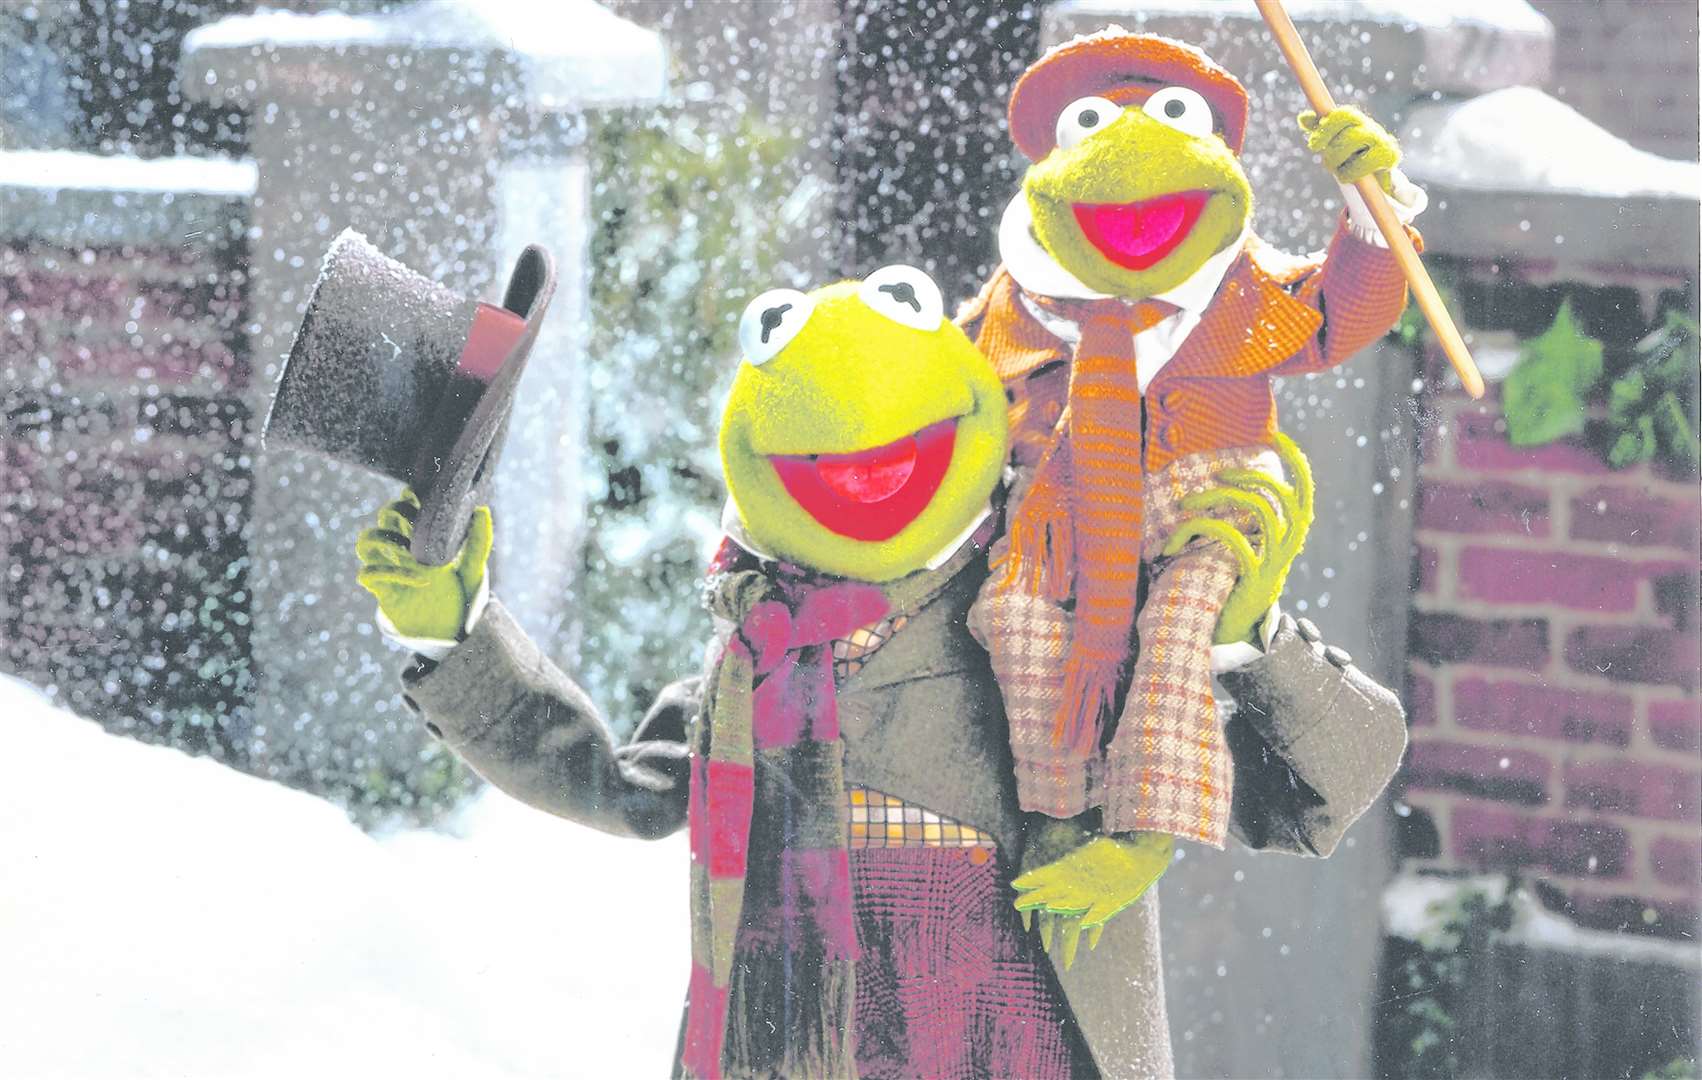 Kermit, a star of festive film The Muppet Christmas Carol, was among the names drivers had given their cars